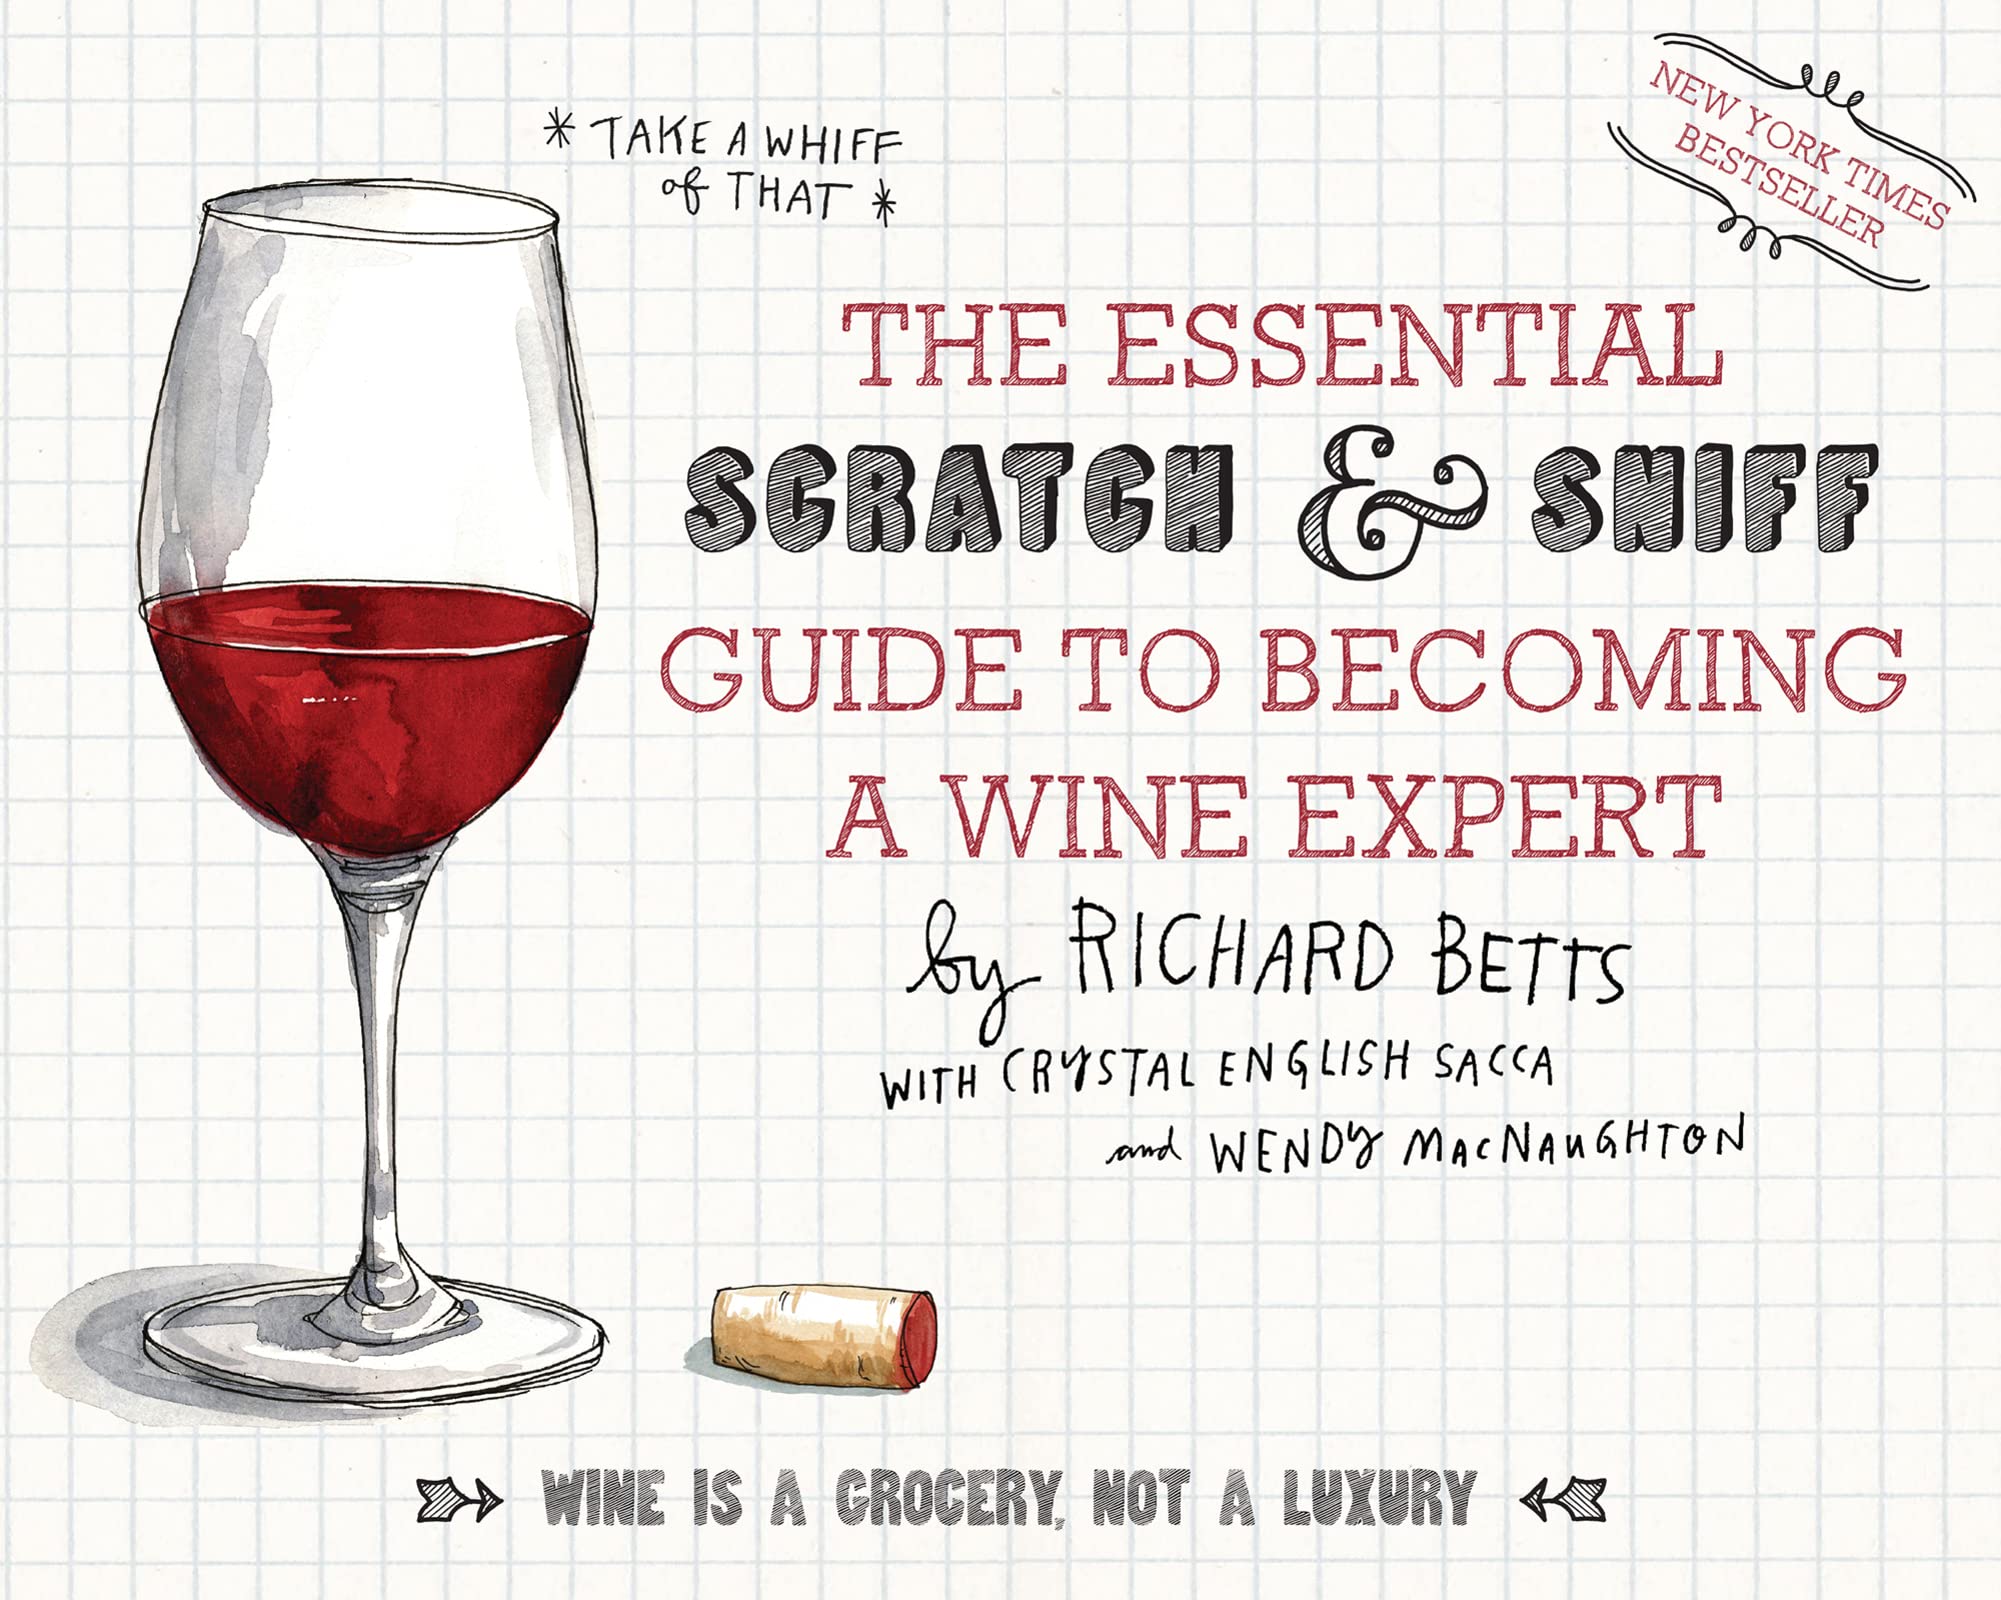 The Essential Scratch & Sniff Guide To Becoming A Wine Expert: Take a Whiff of That